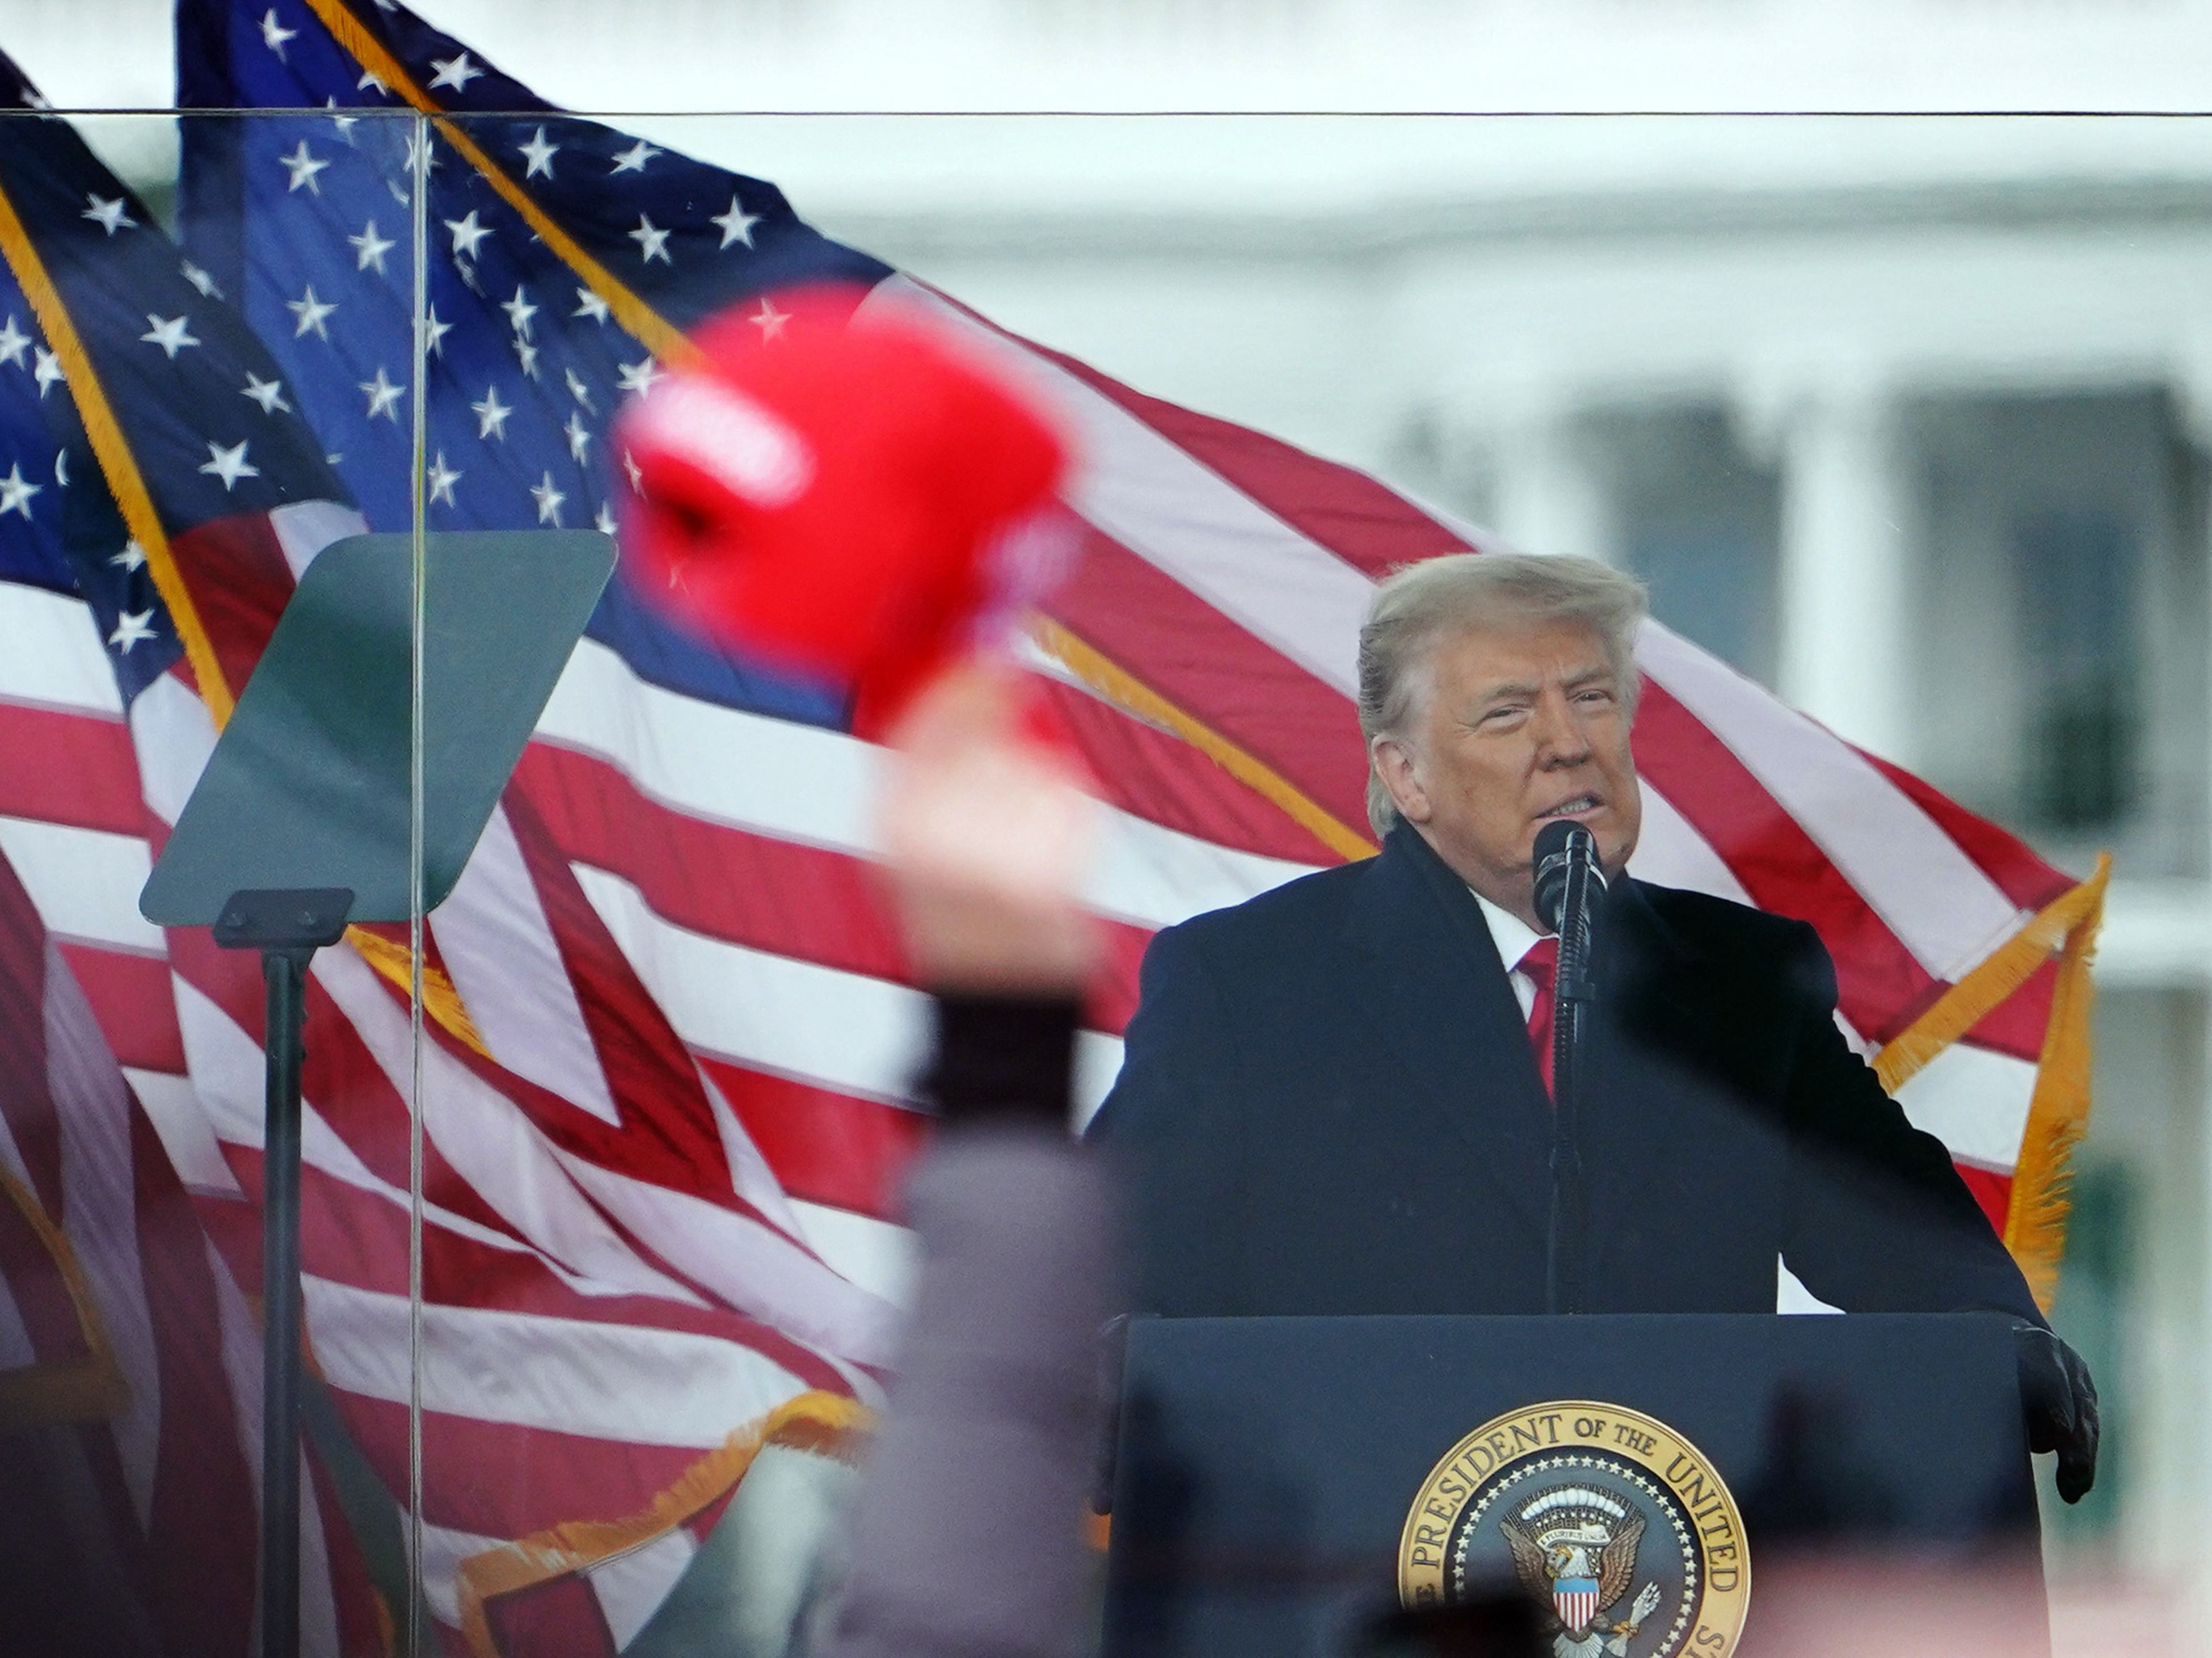 Donald Trump speaks to supporters outside the White House on 6 January 2021